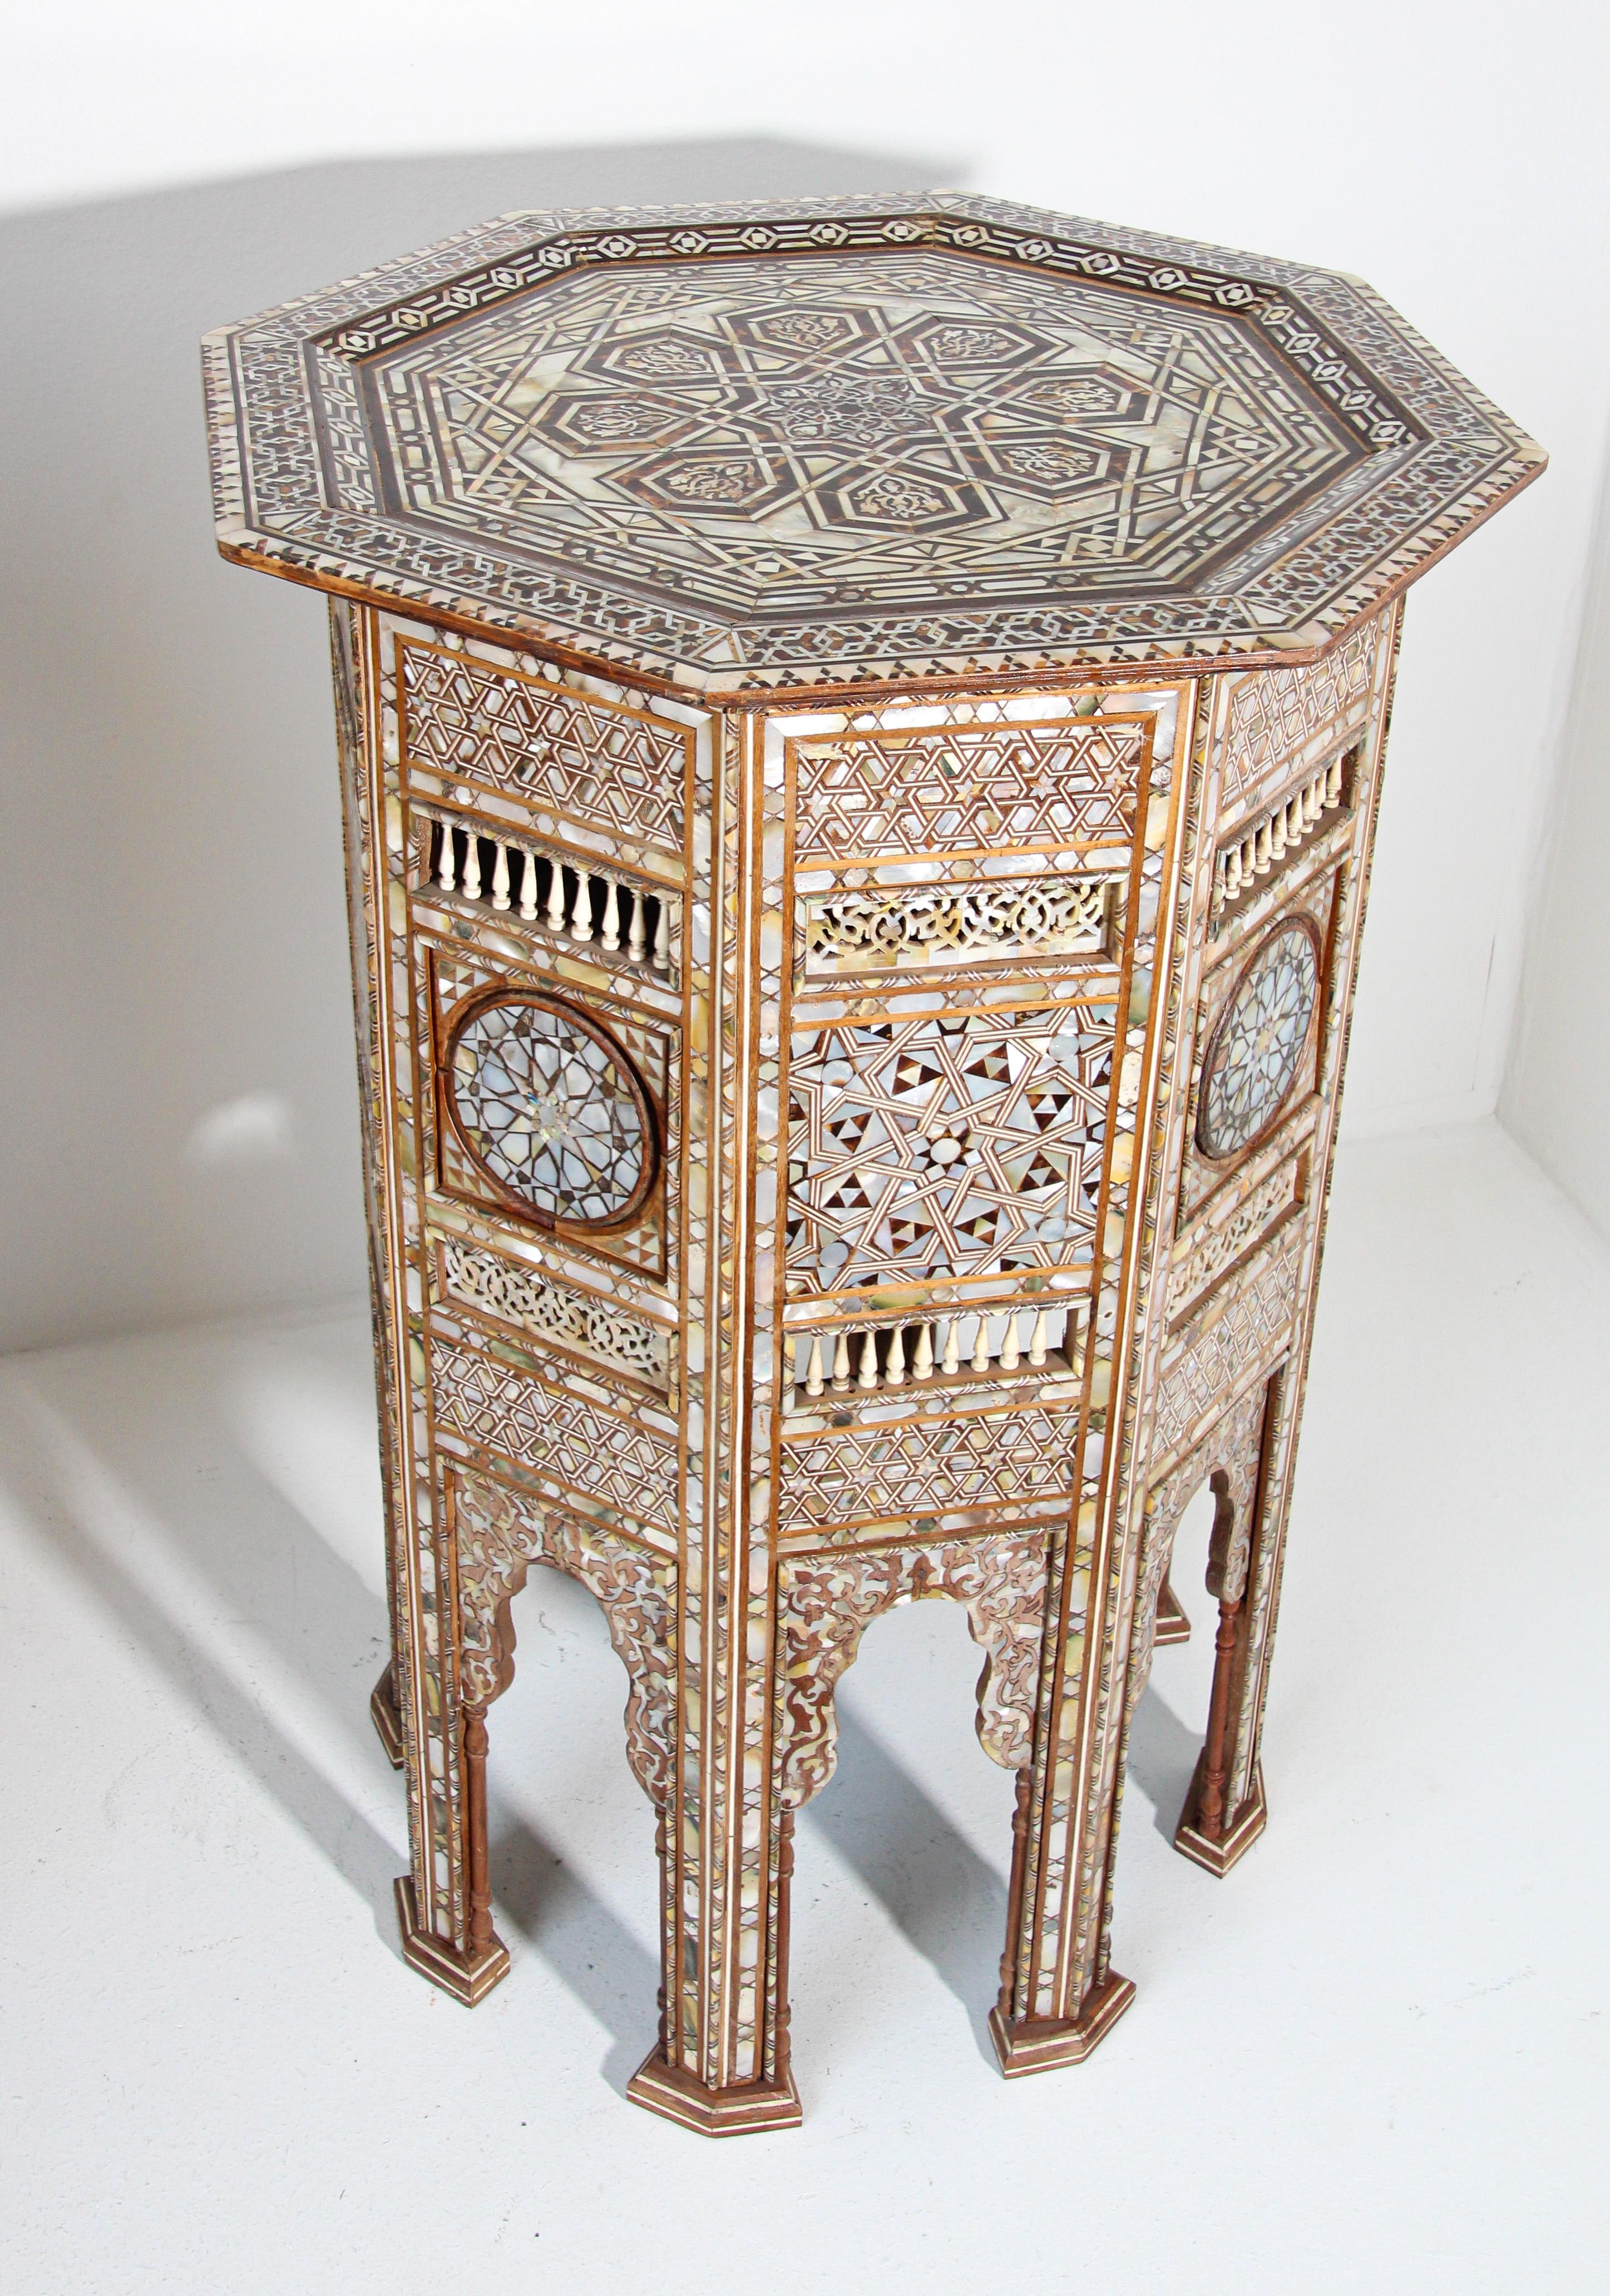 Hand-Crafted Moorish Middle Eastern Large Pedestal Tables Inlaid with Shell, 19th C. For Sale